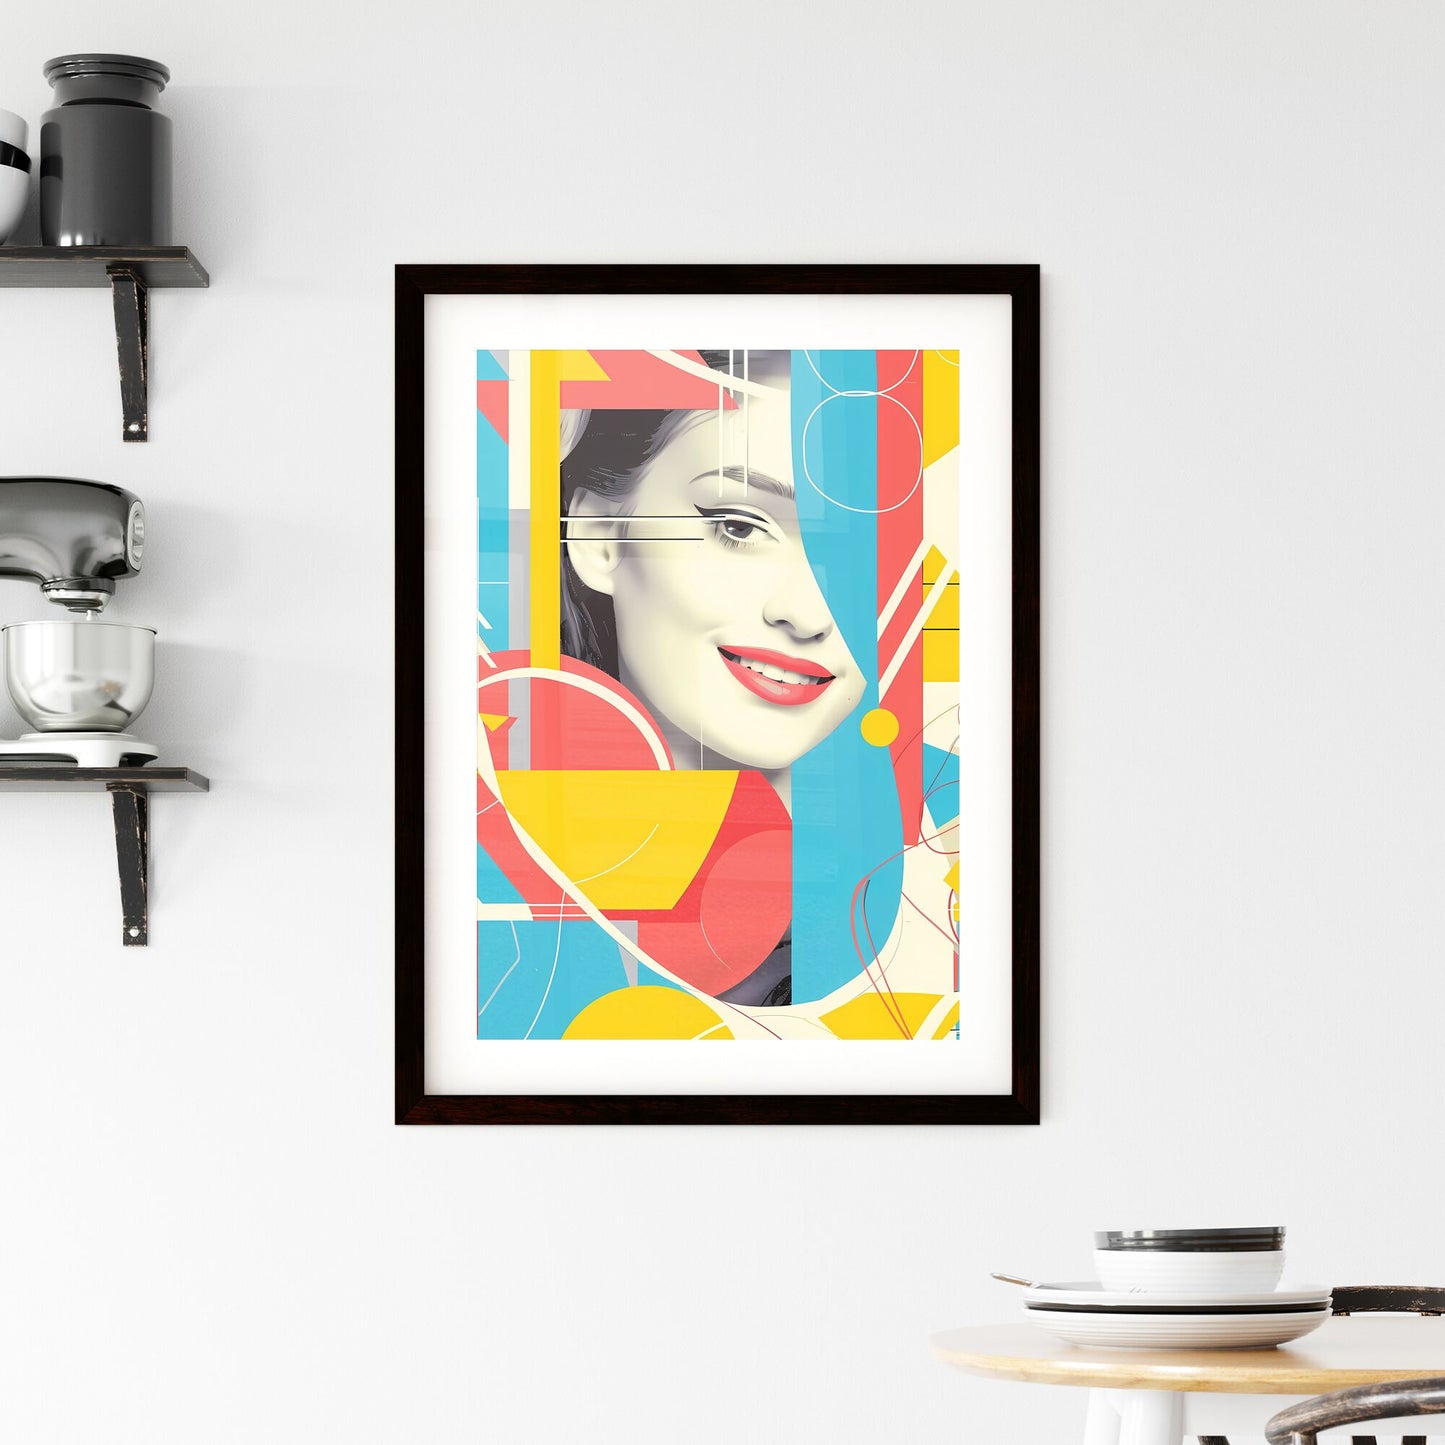 Fluid Lines and Shapes: Vibrant Neoclassical Face on Geometric Puzzle-like Background with Danish Pastels and Collaged Elements. Default Title